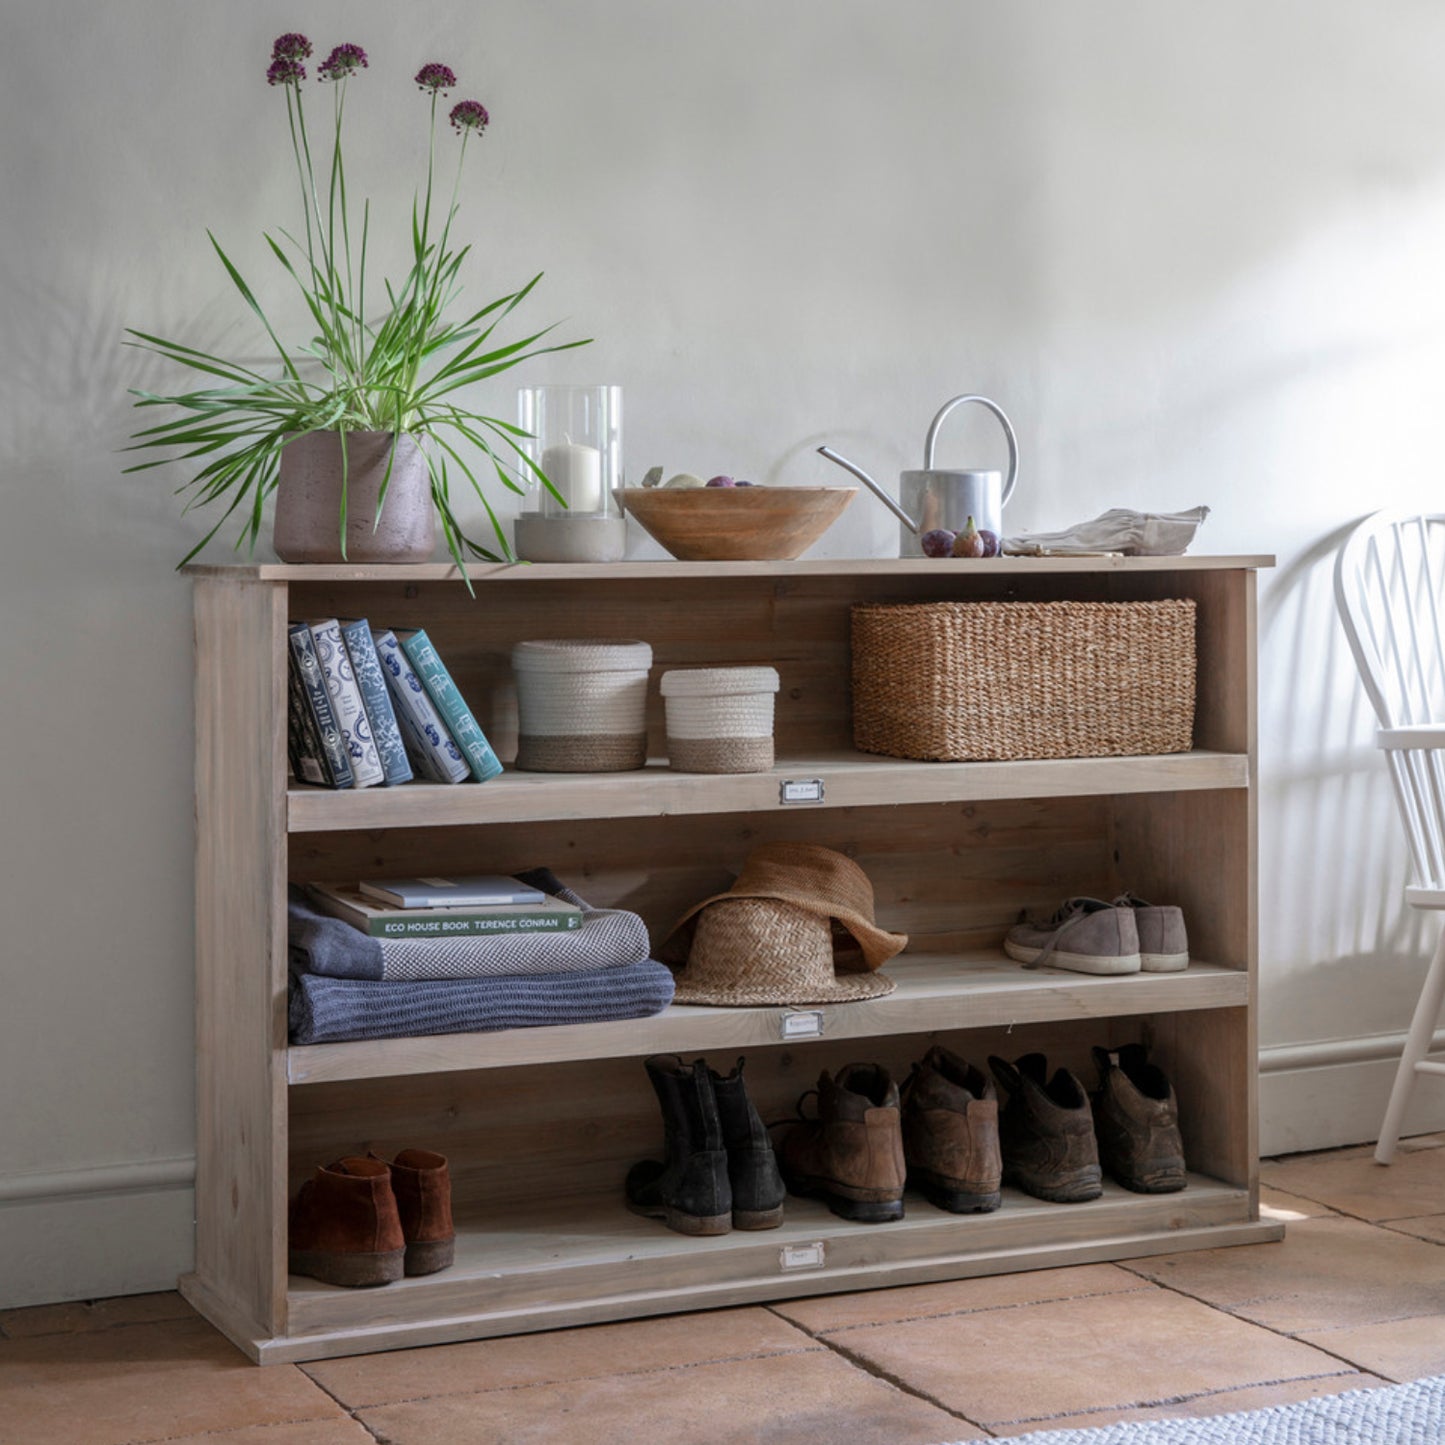 Large Chedworth Shelving by Garden Trading - Spruce